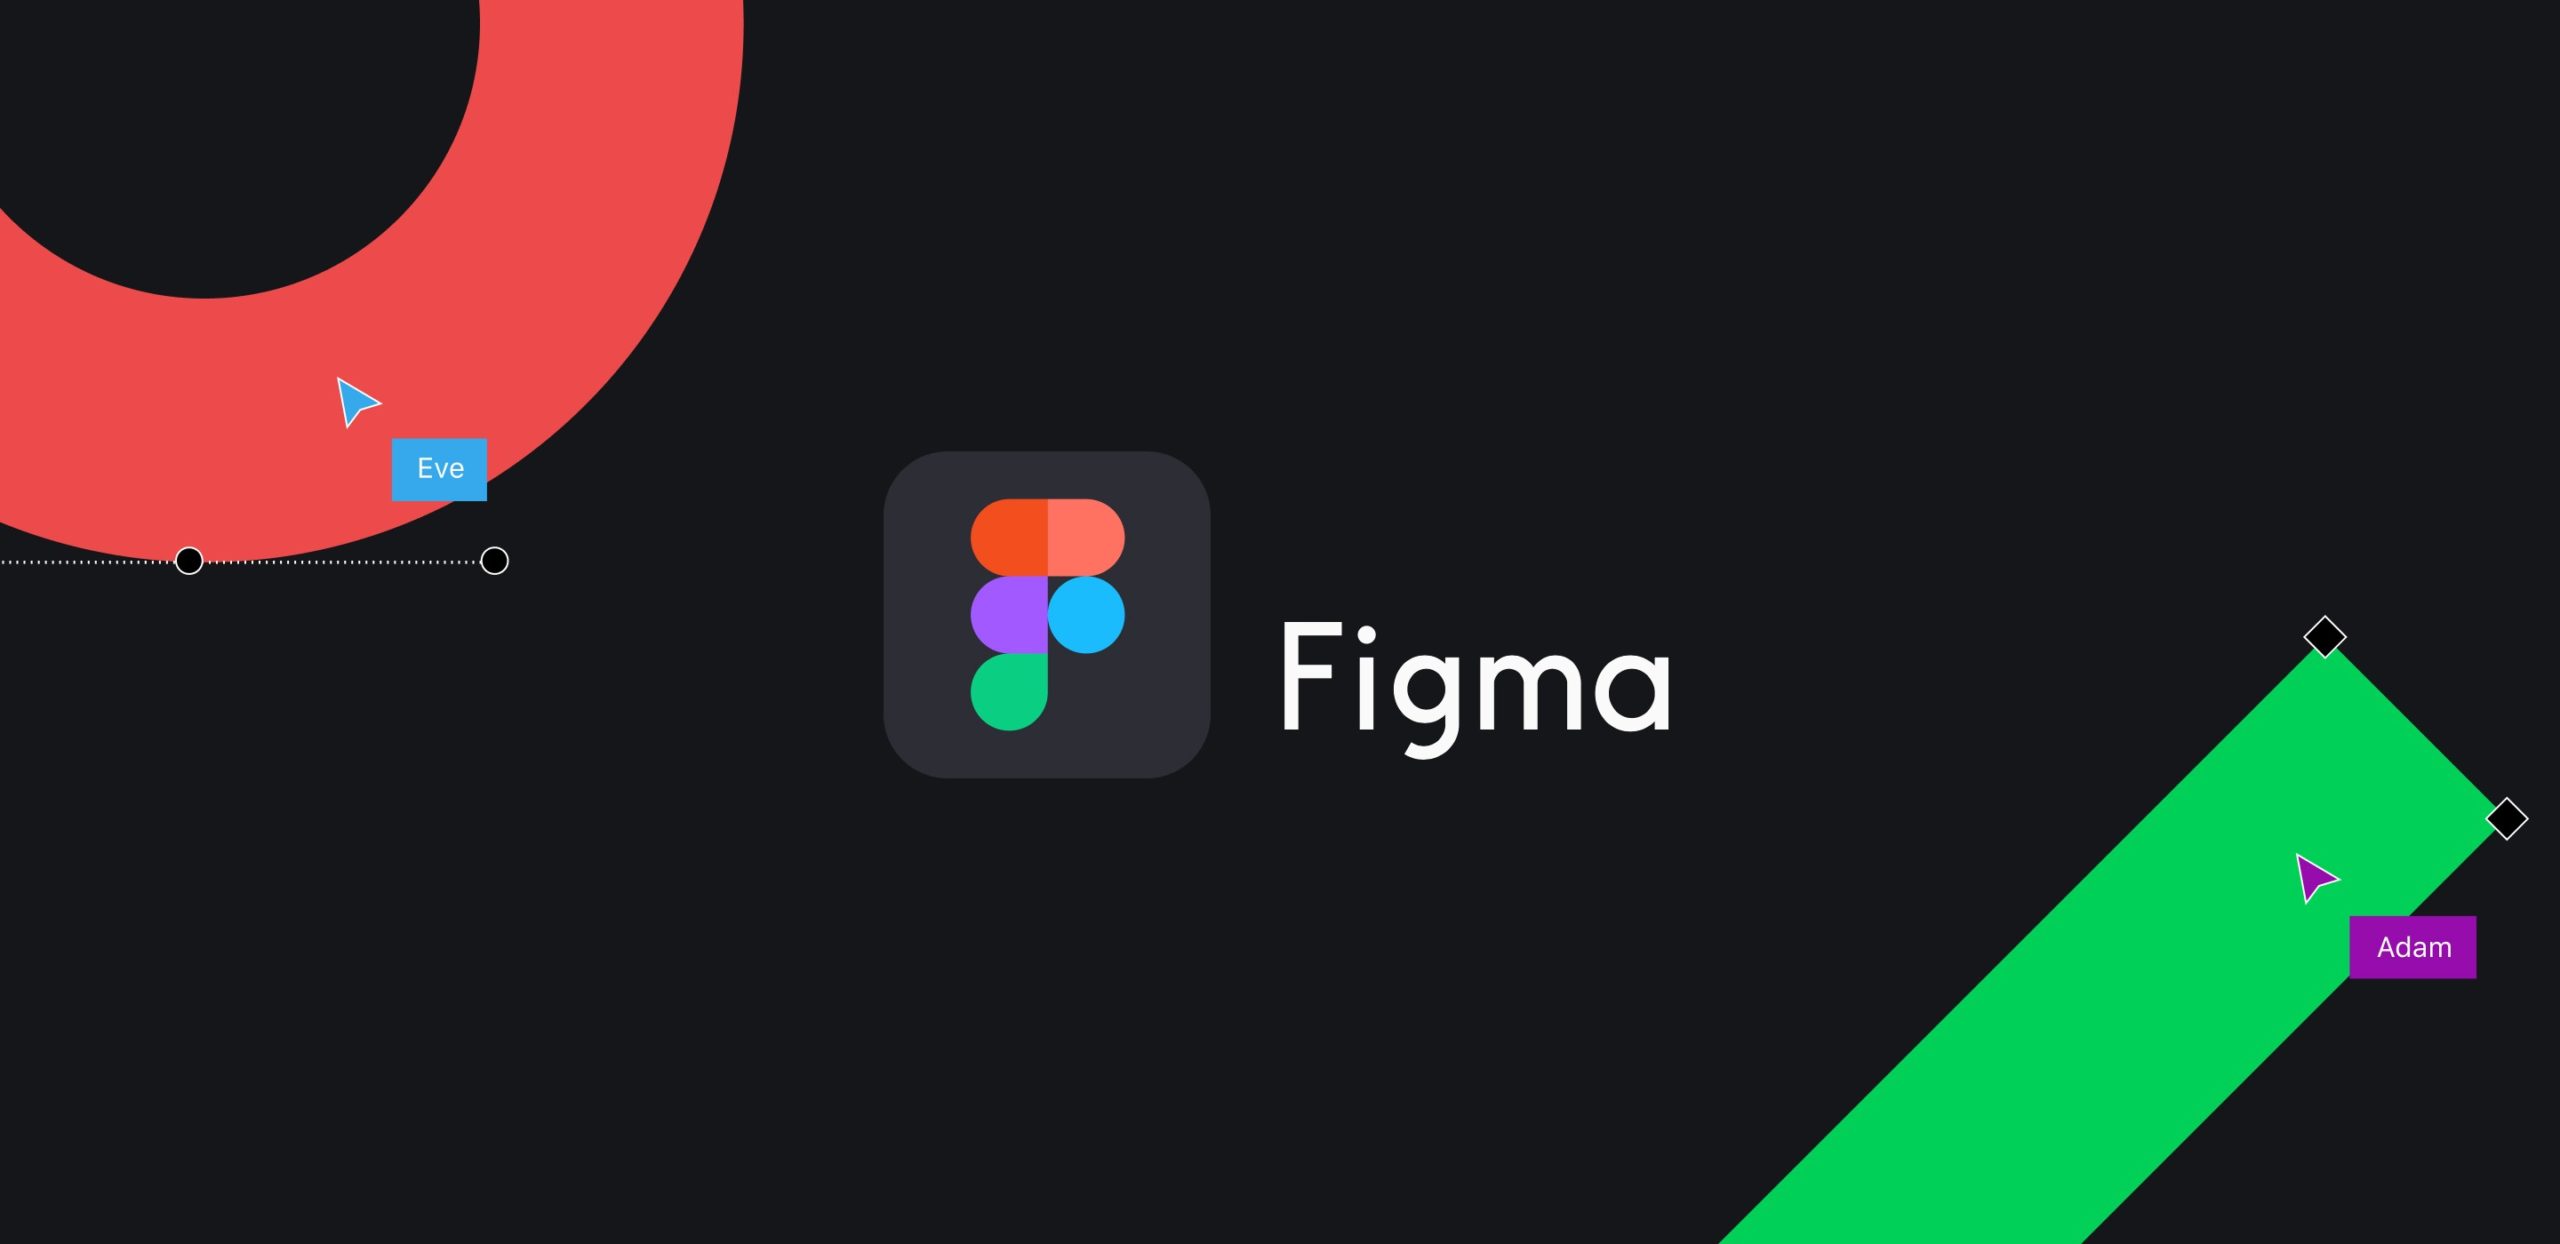 Figma comments are not posting